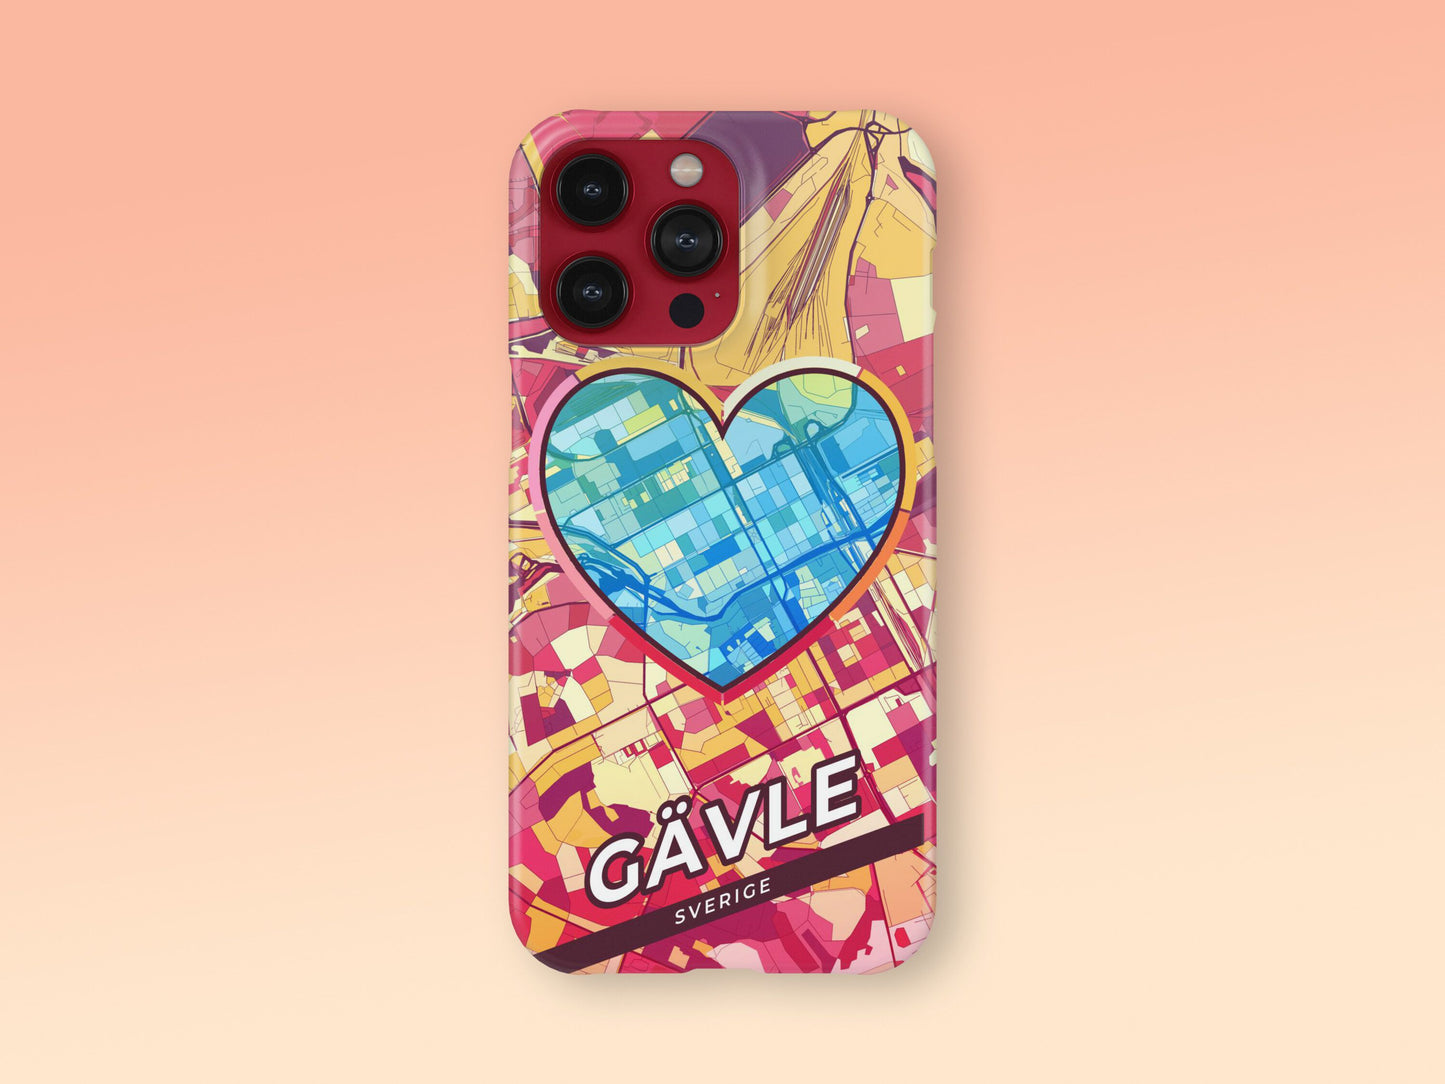 Gävle Sweden slim phone case with colorful icon. Birthday, wedding or housewarming gift. Couple match cases. 2